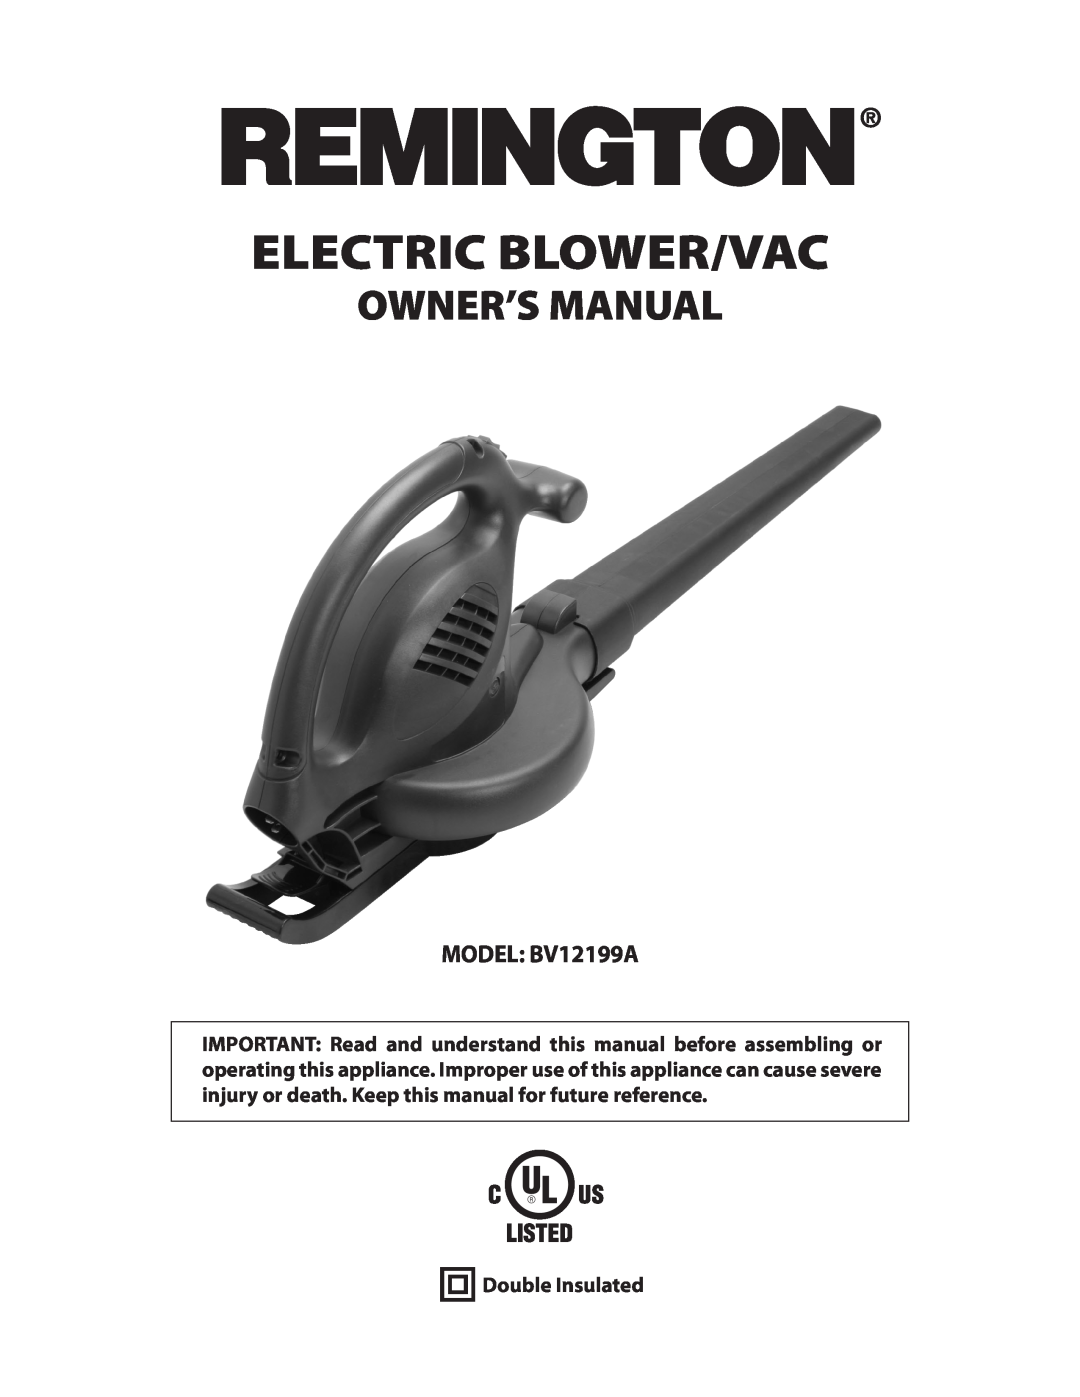 Remington owner manual Electric Blower/Vac, Owner’S Manual, MODEL BV12199A, Double Insulated 